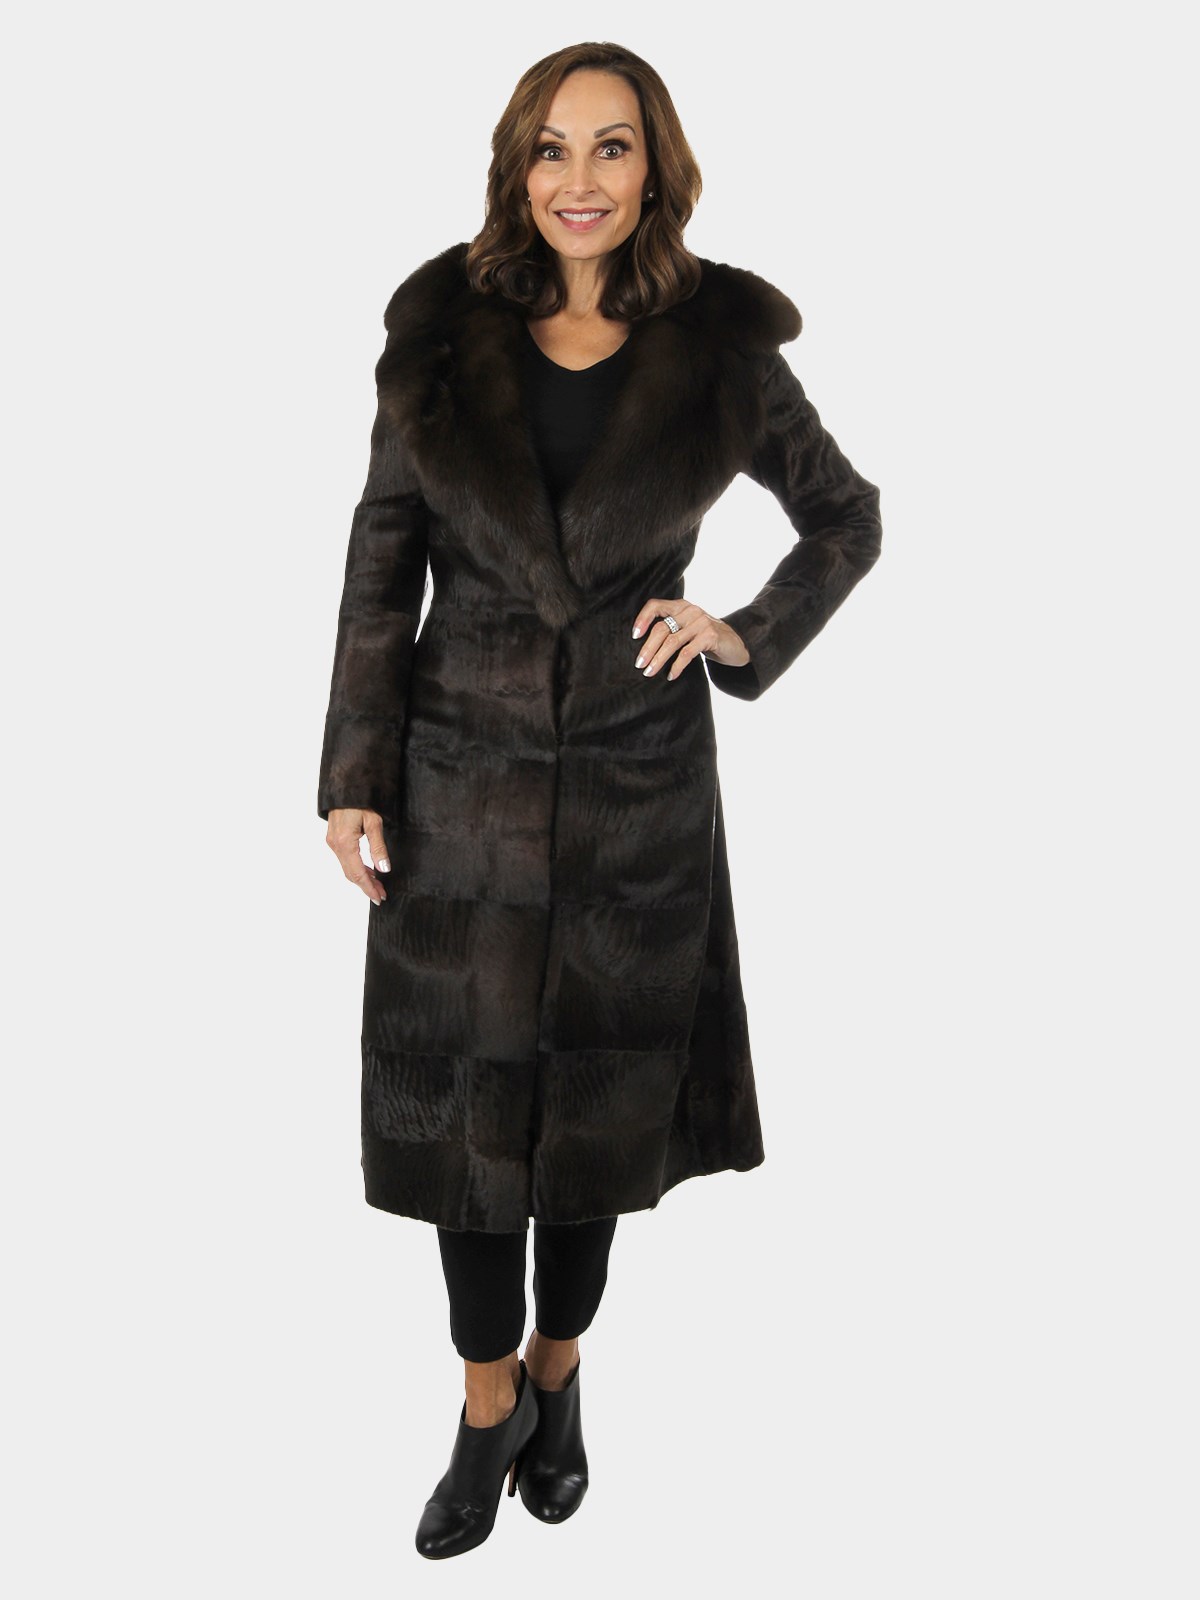 Woman's Dennis Basso Brown Broadtail Lamb Fur Coat with Sable Collar